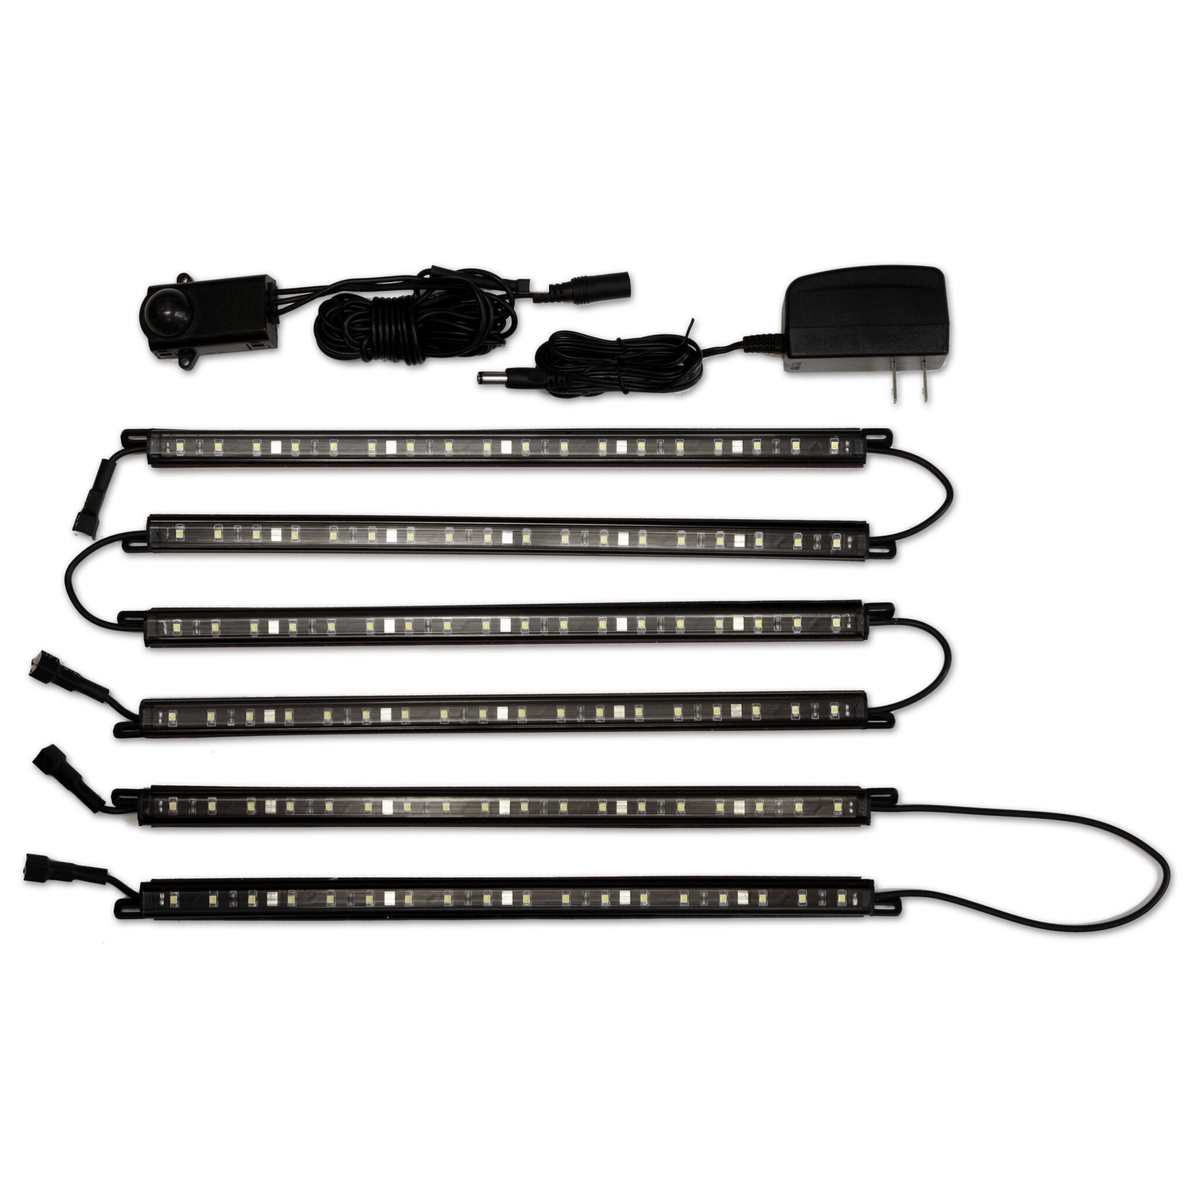 Accessory - Lights - Clearview Safe Light Kit - (6 wand lights